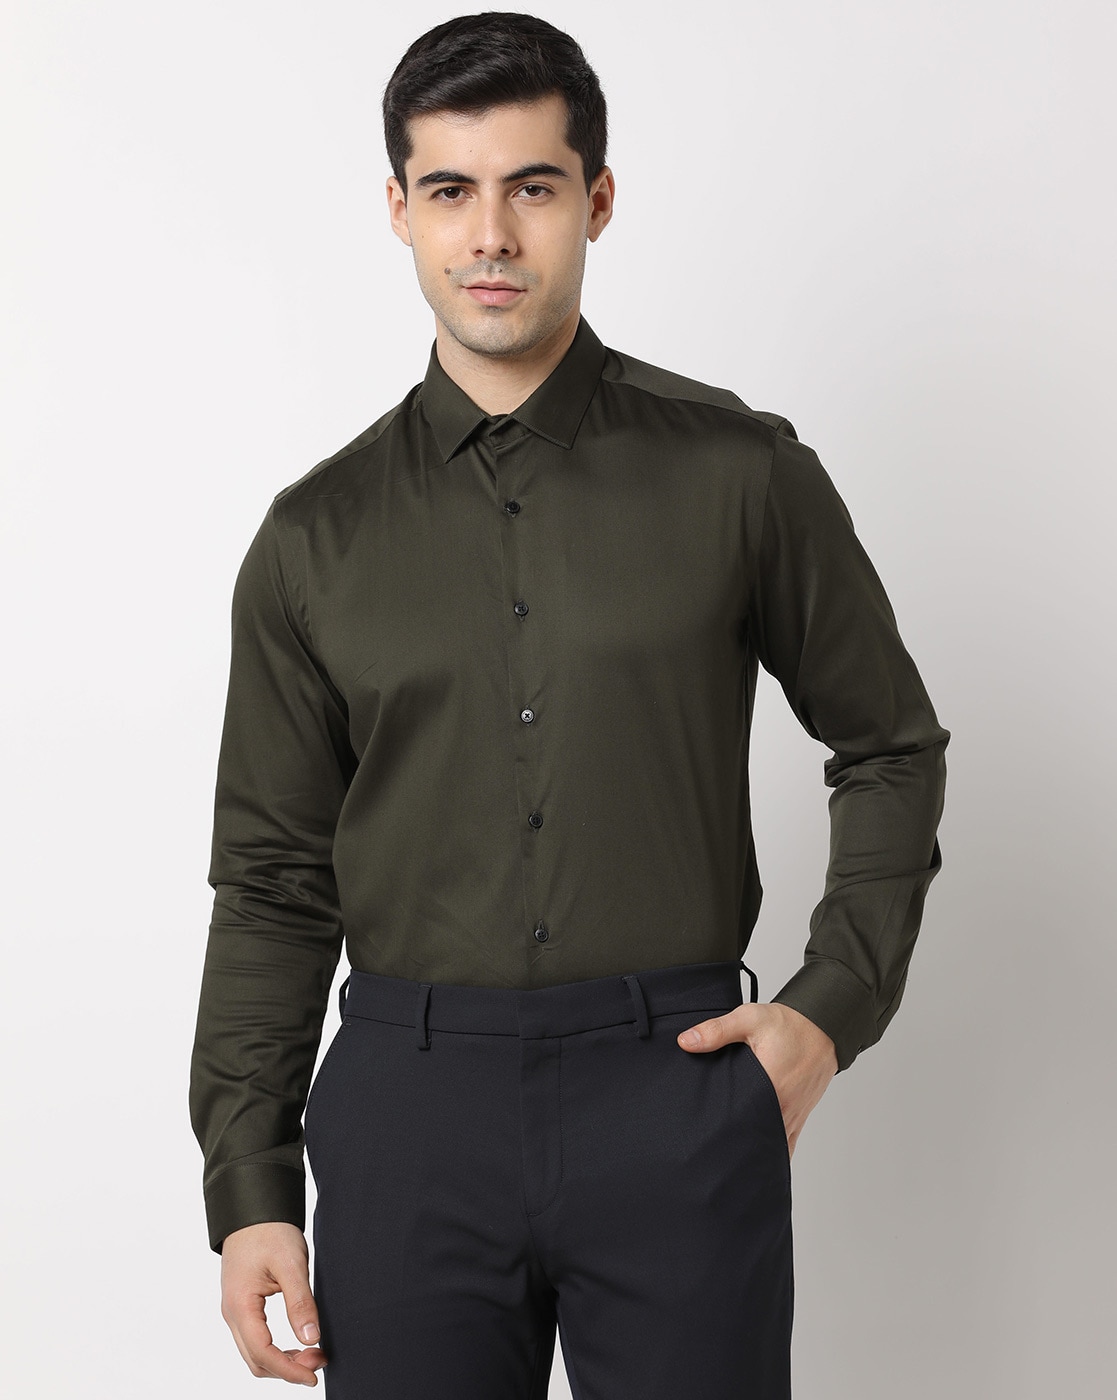 Shirt and Pant Combo 3 (Bottle Green Shirt and Black Pant) – Cloth Culture